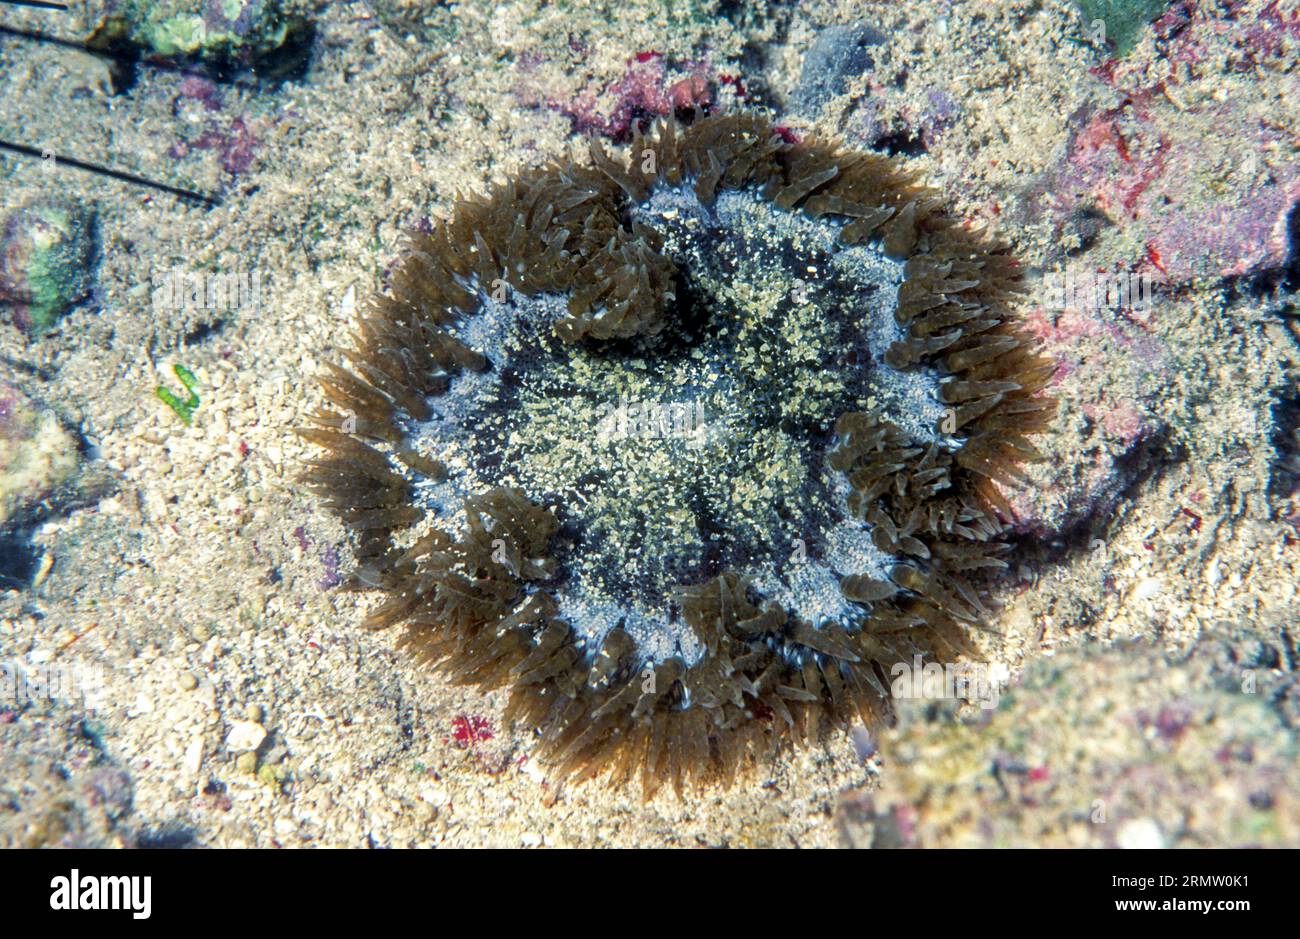 Rock flower anemone (Epicystis crucifer) from Puerto Rico, the Caribbean. Stock Photo